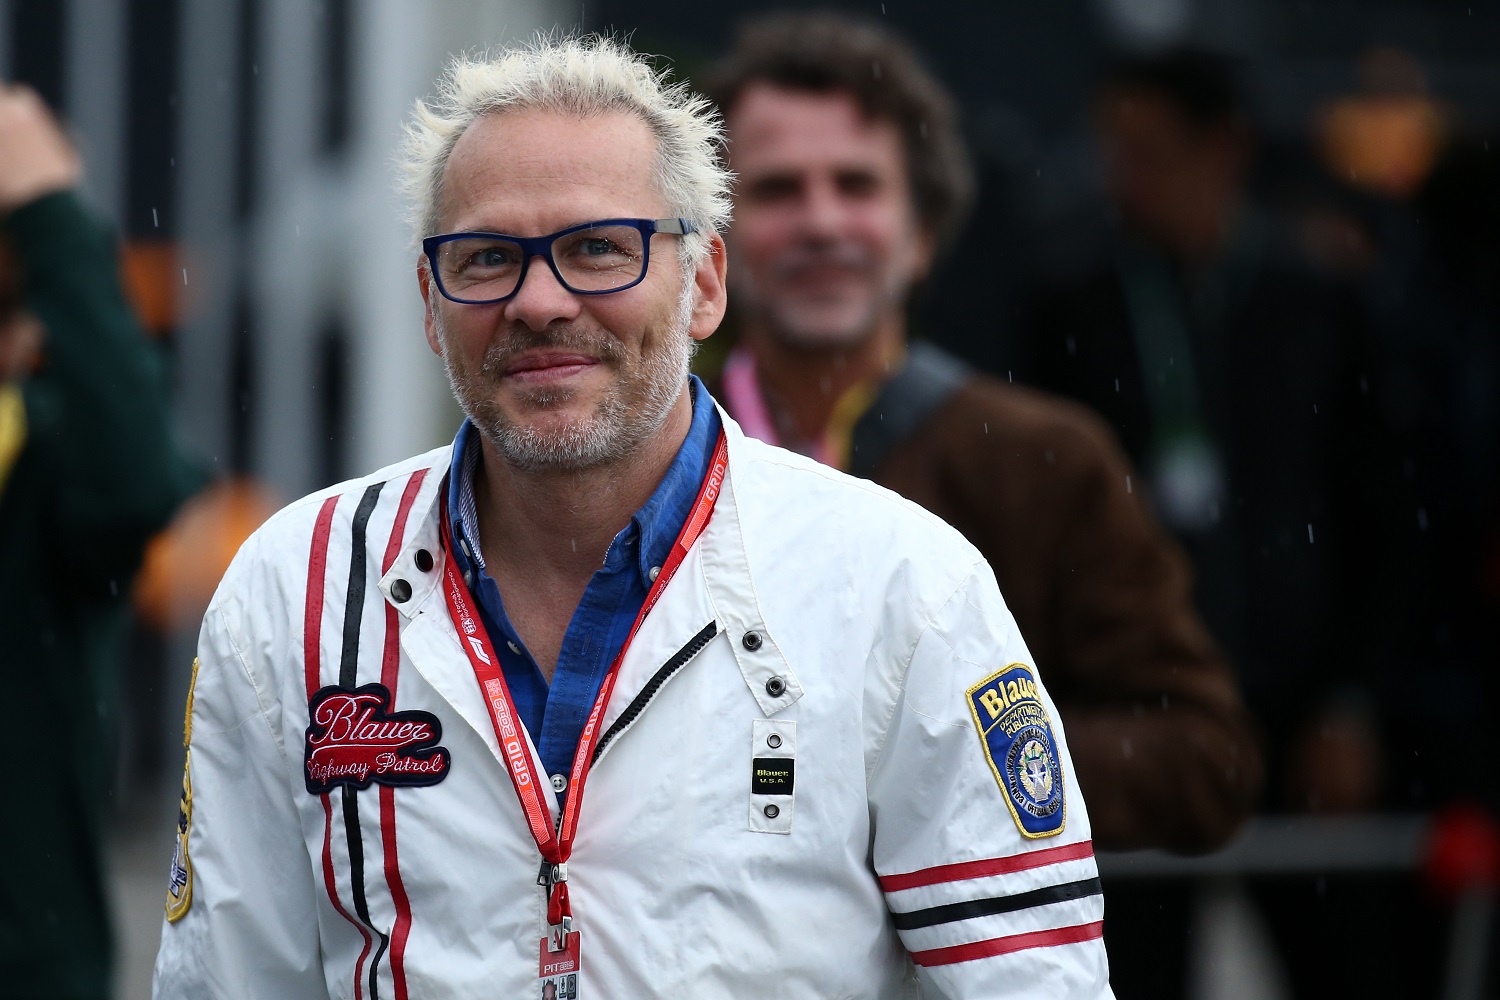 Jacques Villeneuve in the paddock during the Formula 1 Grand Prix of Italy.